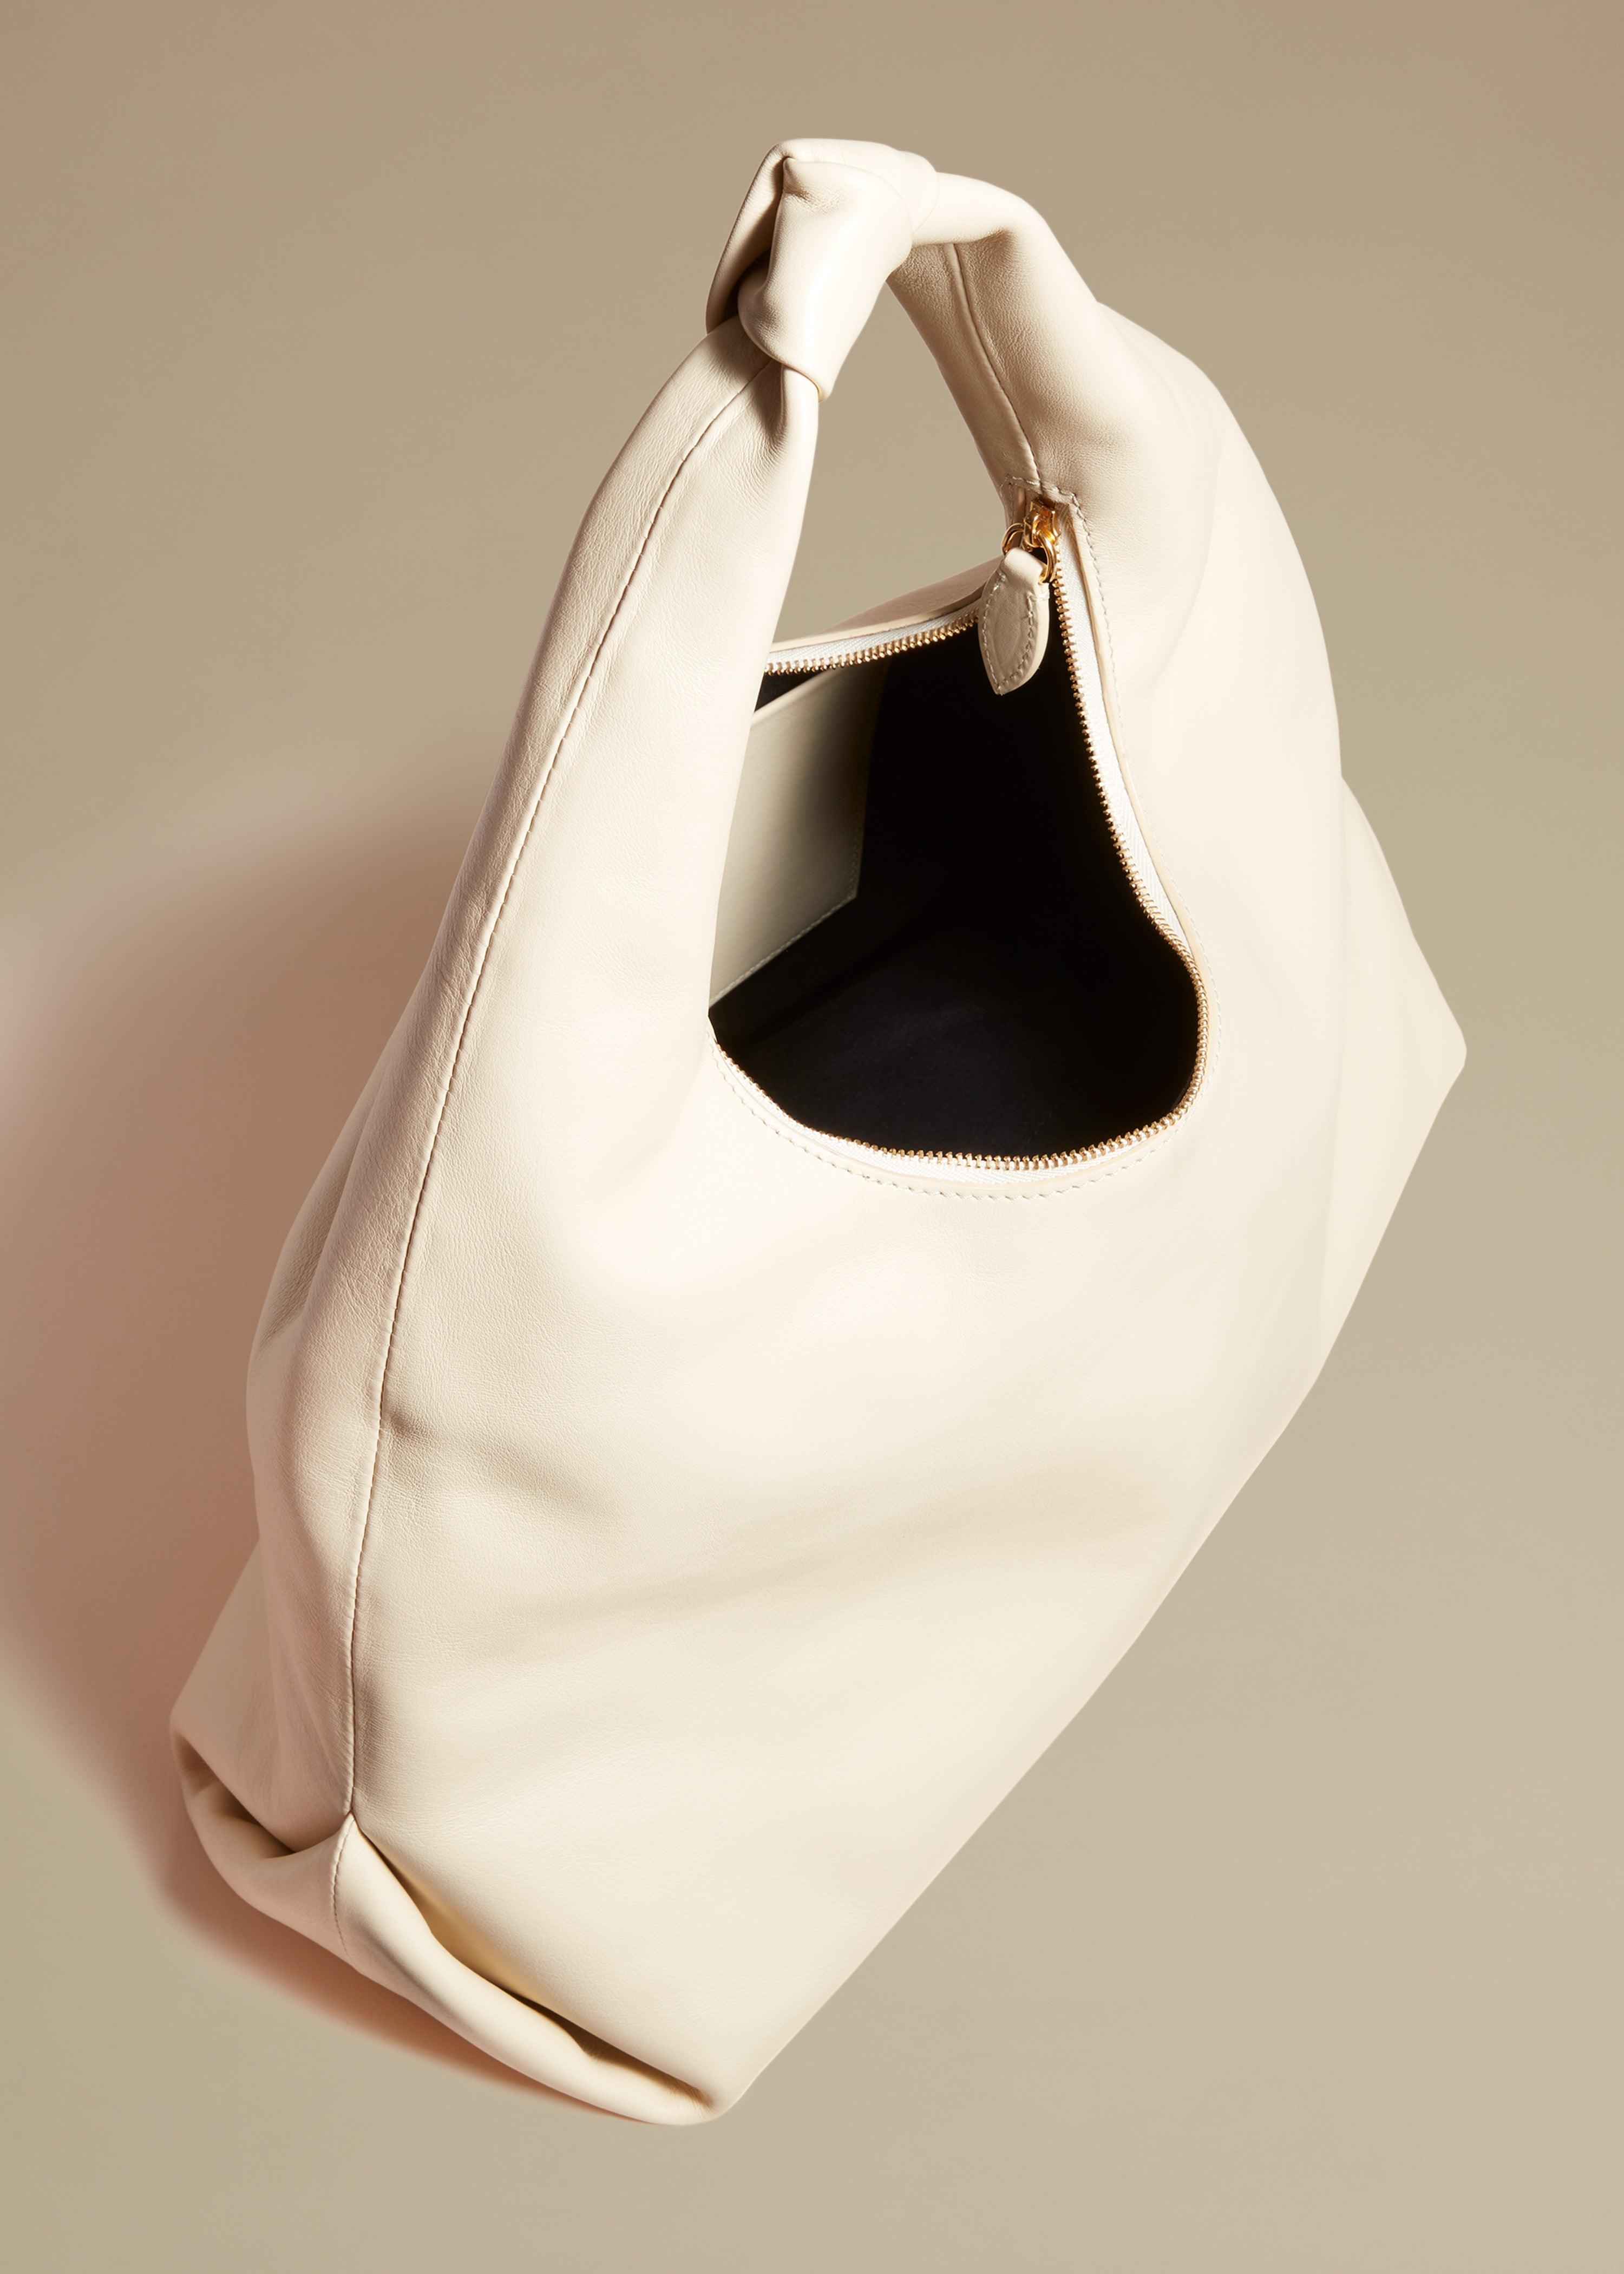 The Large Beatrice Hobo in Cream Leather - The Iconic Issue